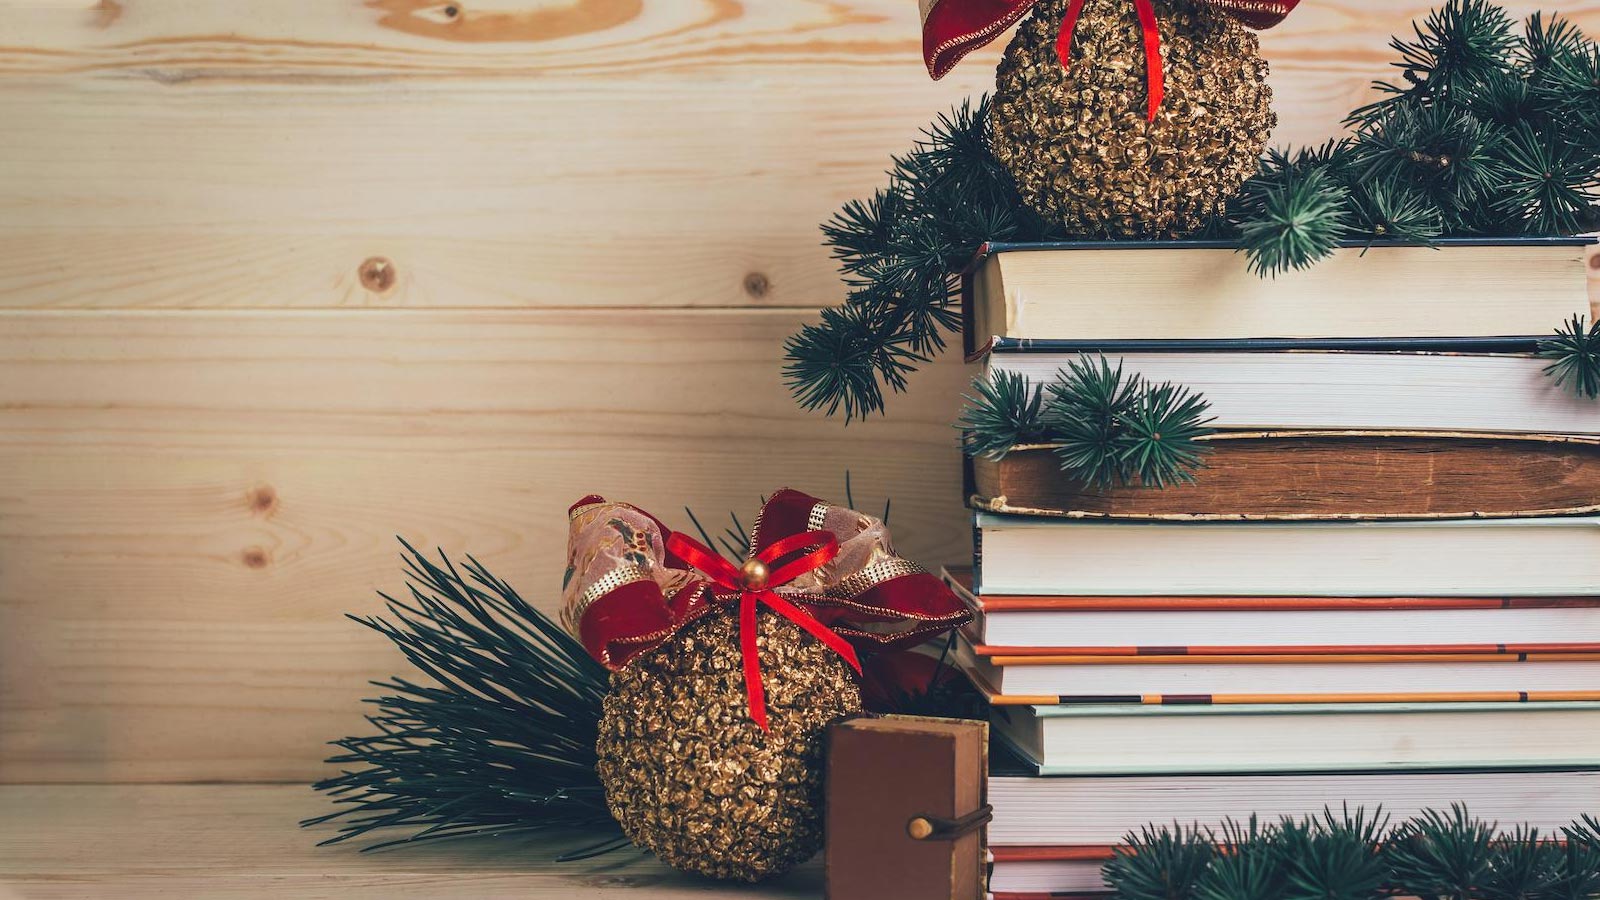 Get into the festive spirit with these 10 classic literary quotes